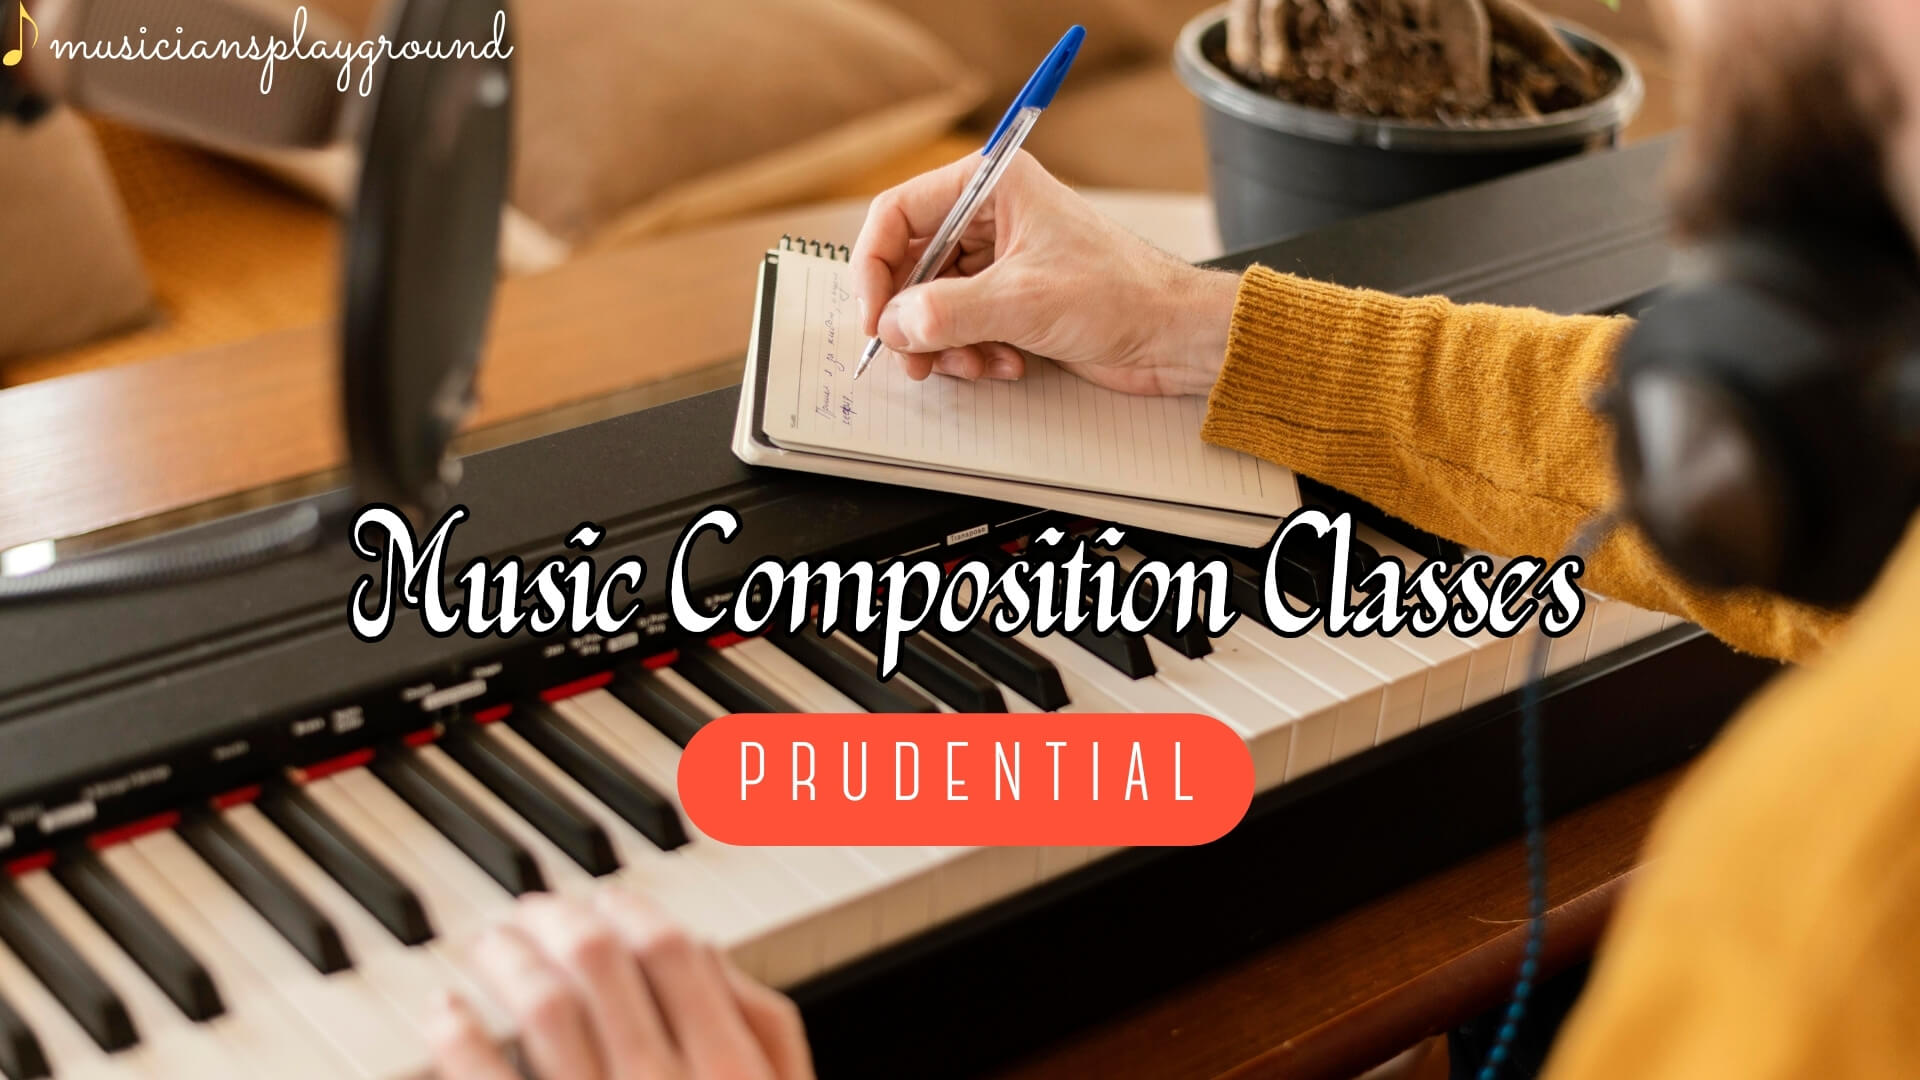 Music Composition Classes in Prudential, Massachusetts: Unlock Your Musical Potential at Musicians Playground